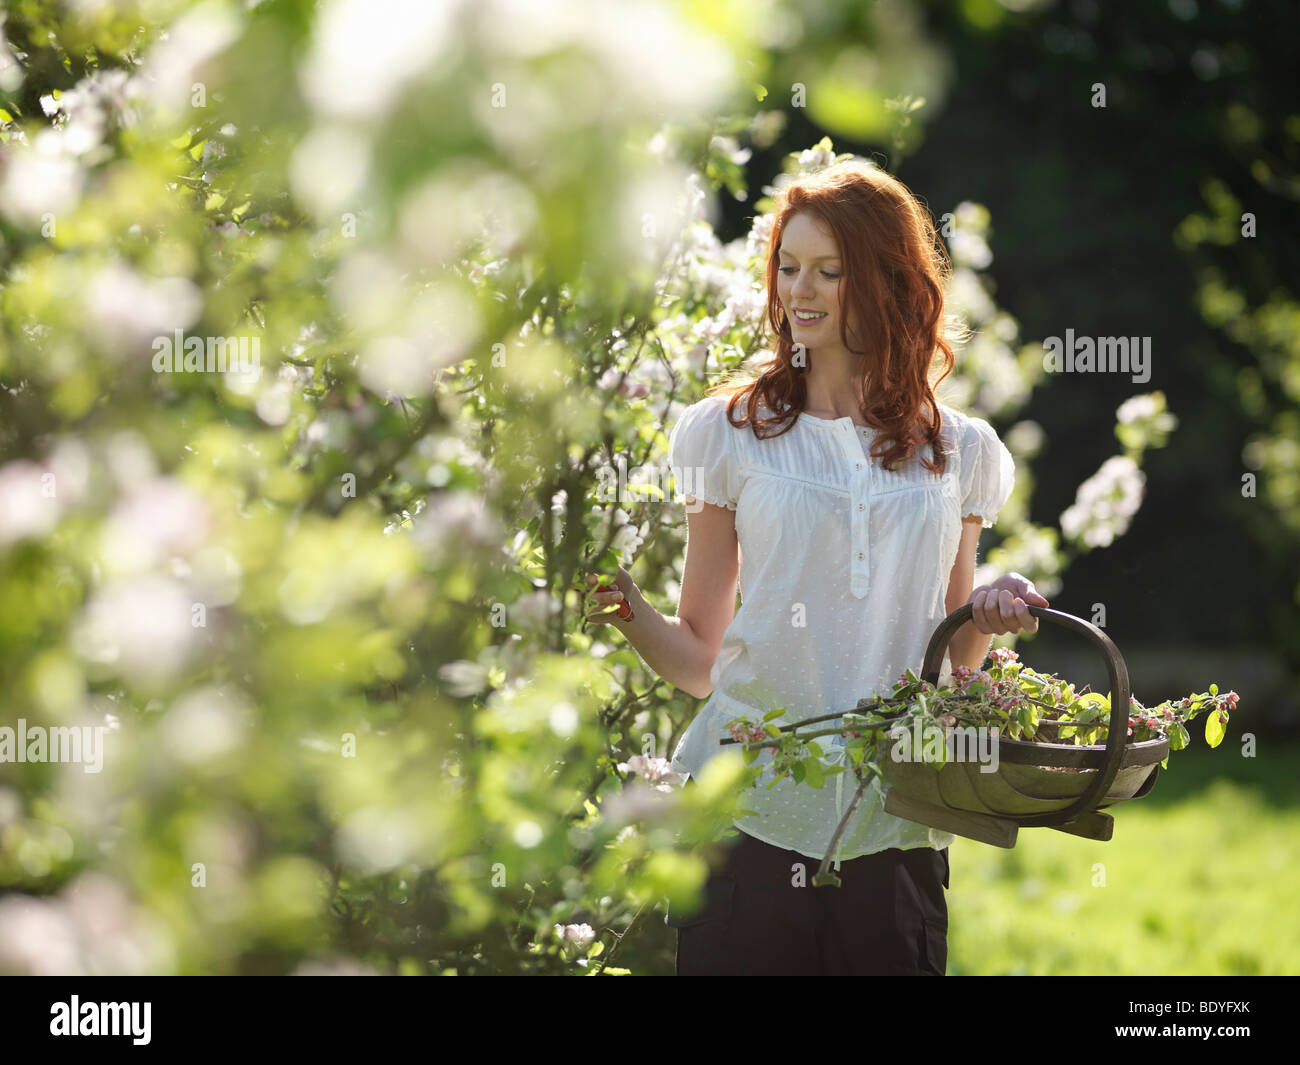 Woman Cutting Apple Blossom In Orchard Stock Photo